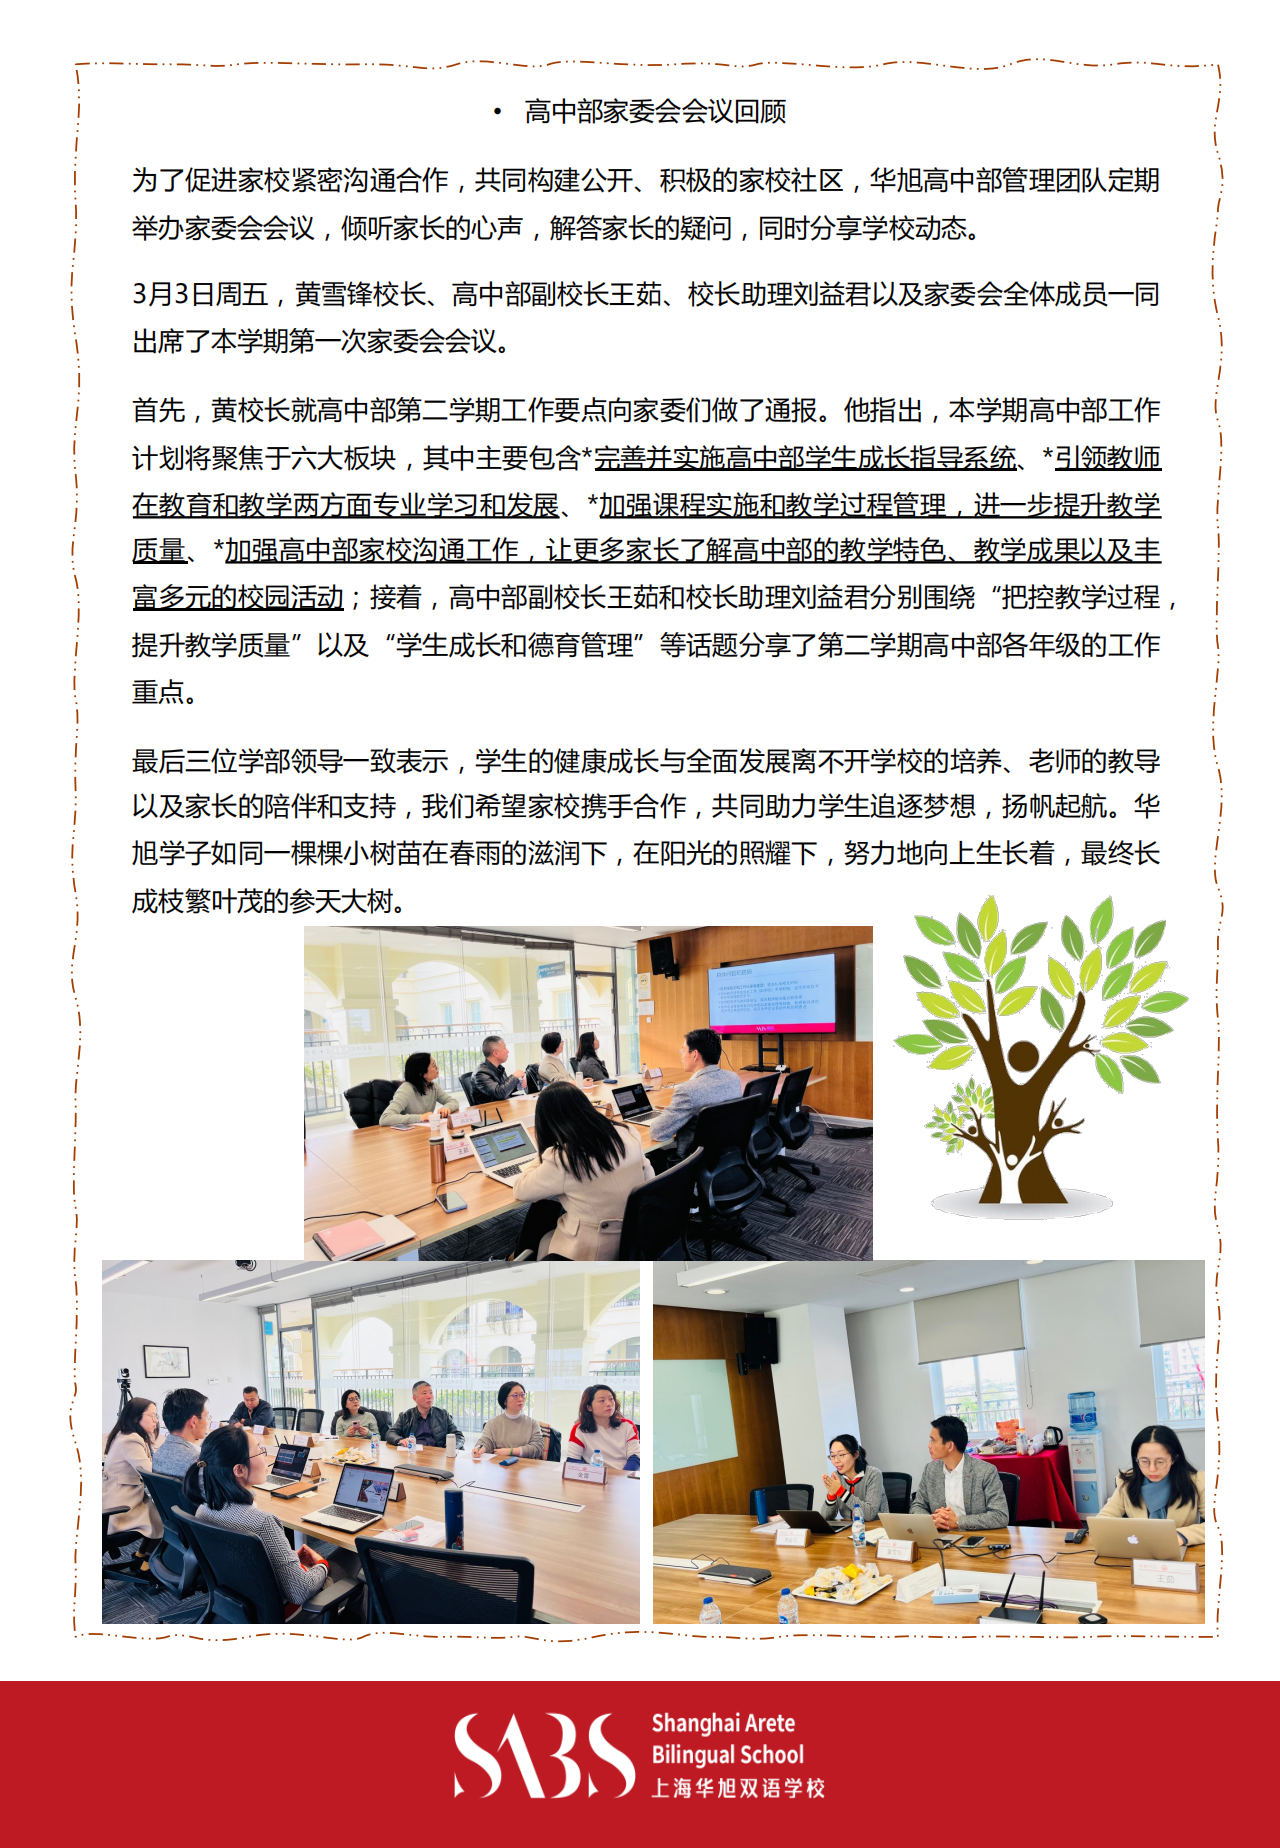 HS 2nd Issue Newsletter pptx（中文）_22.png